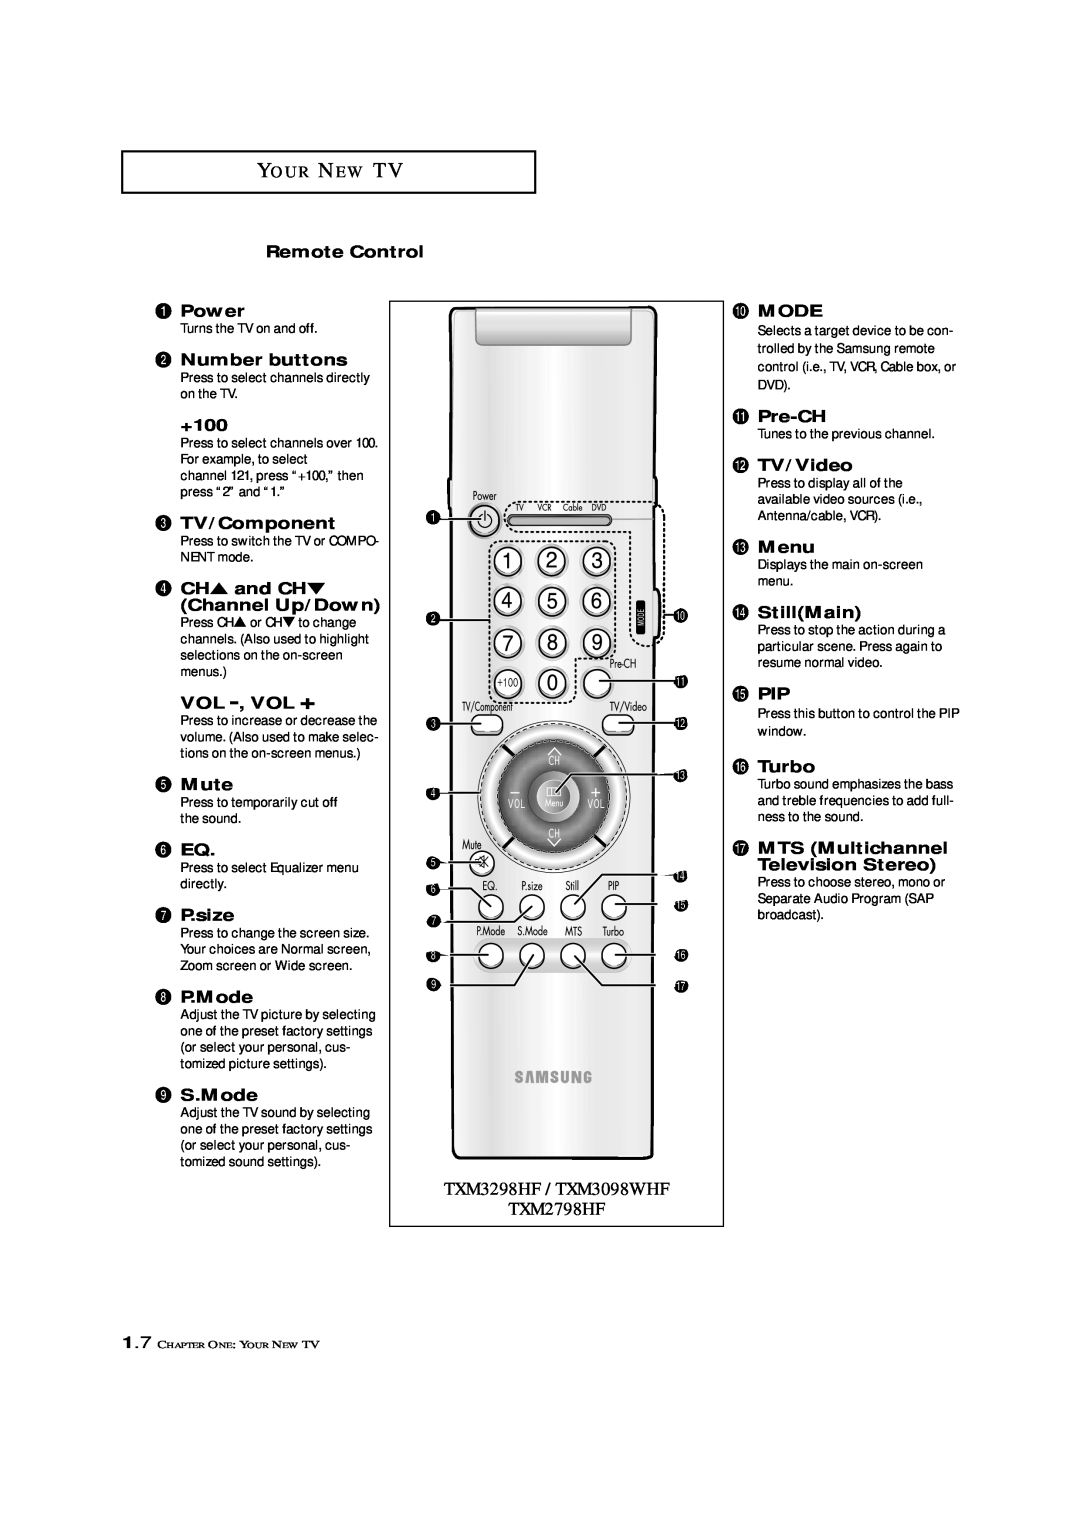 Samsung TXM 2796HF Remote Control Œ Power, ´ Number buttons, +100, ˇ TV/Component, ¨ CH and CH Channel Up/Down, ˆ Mute 